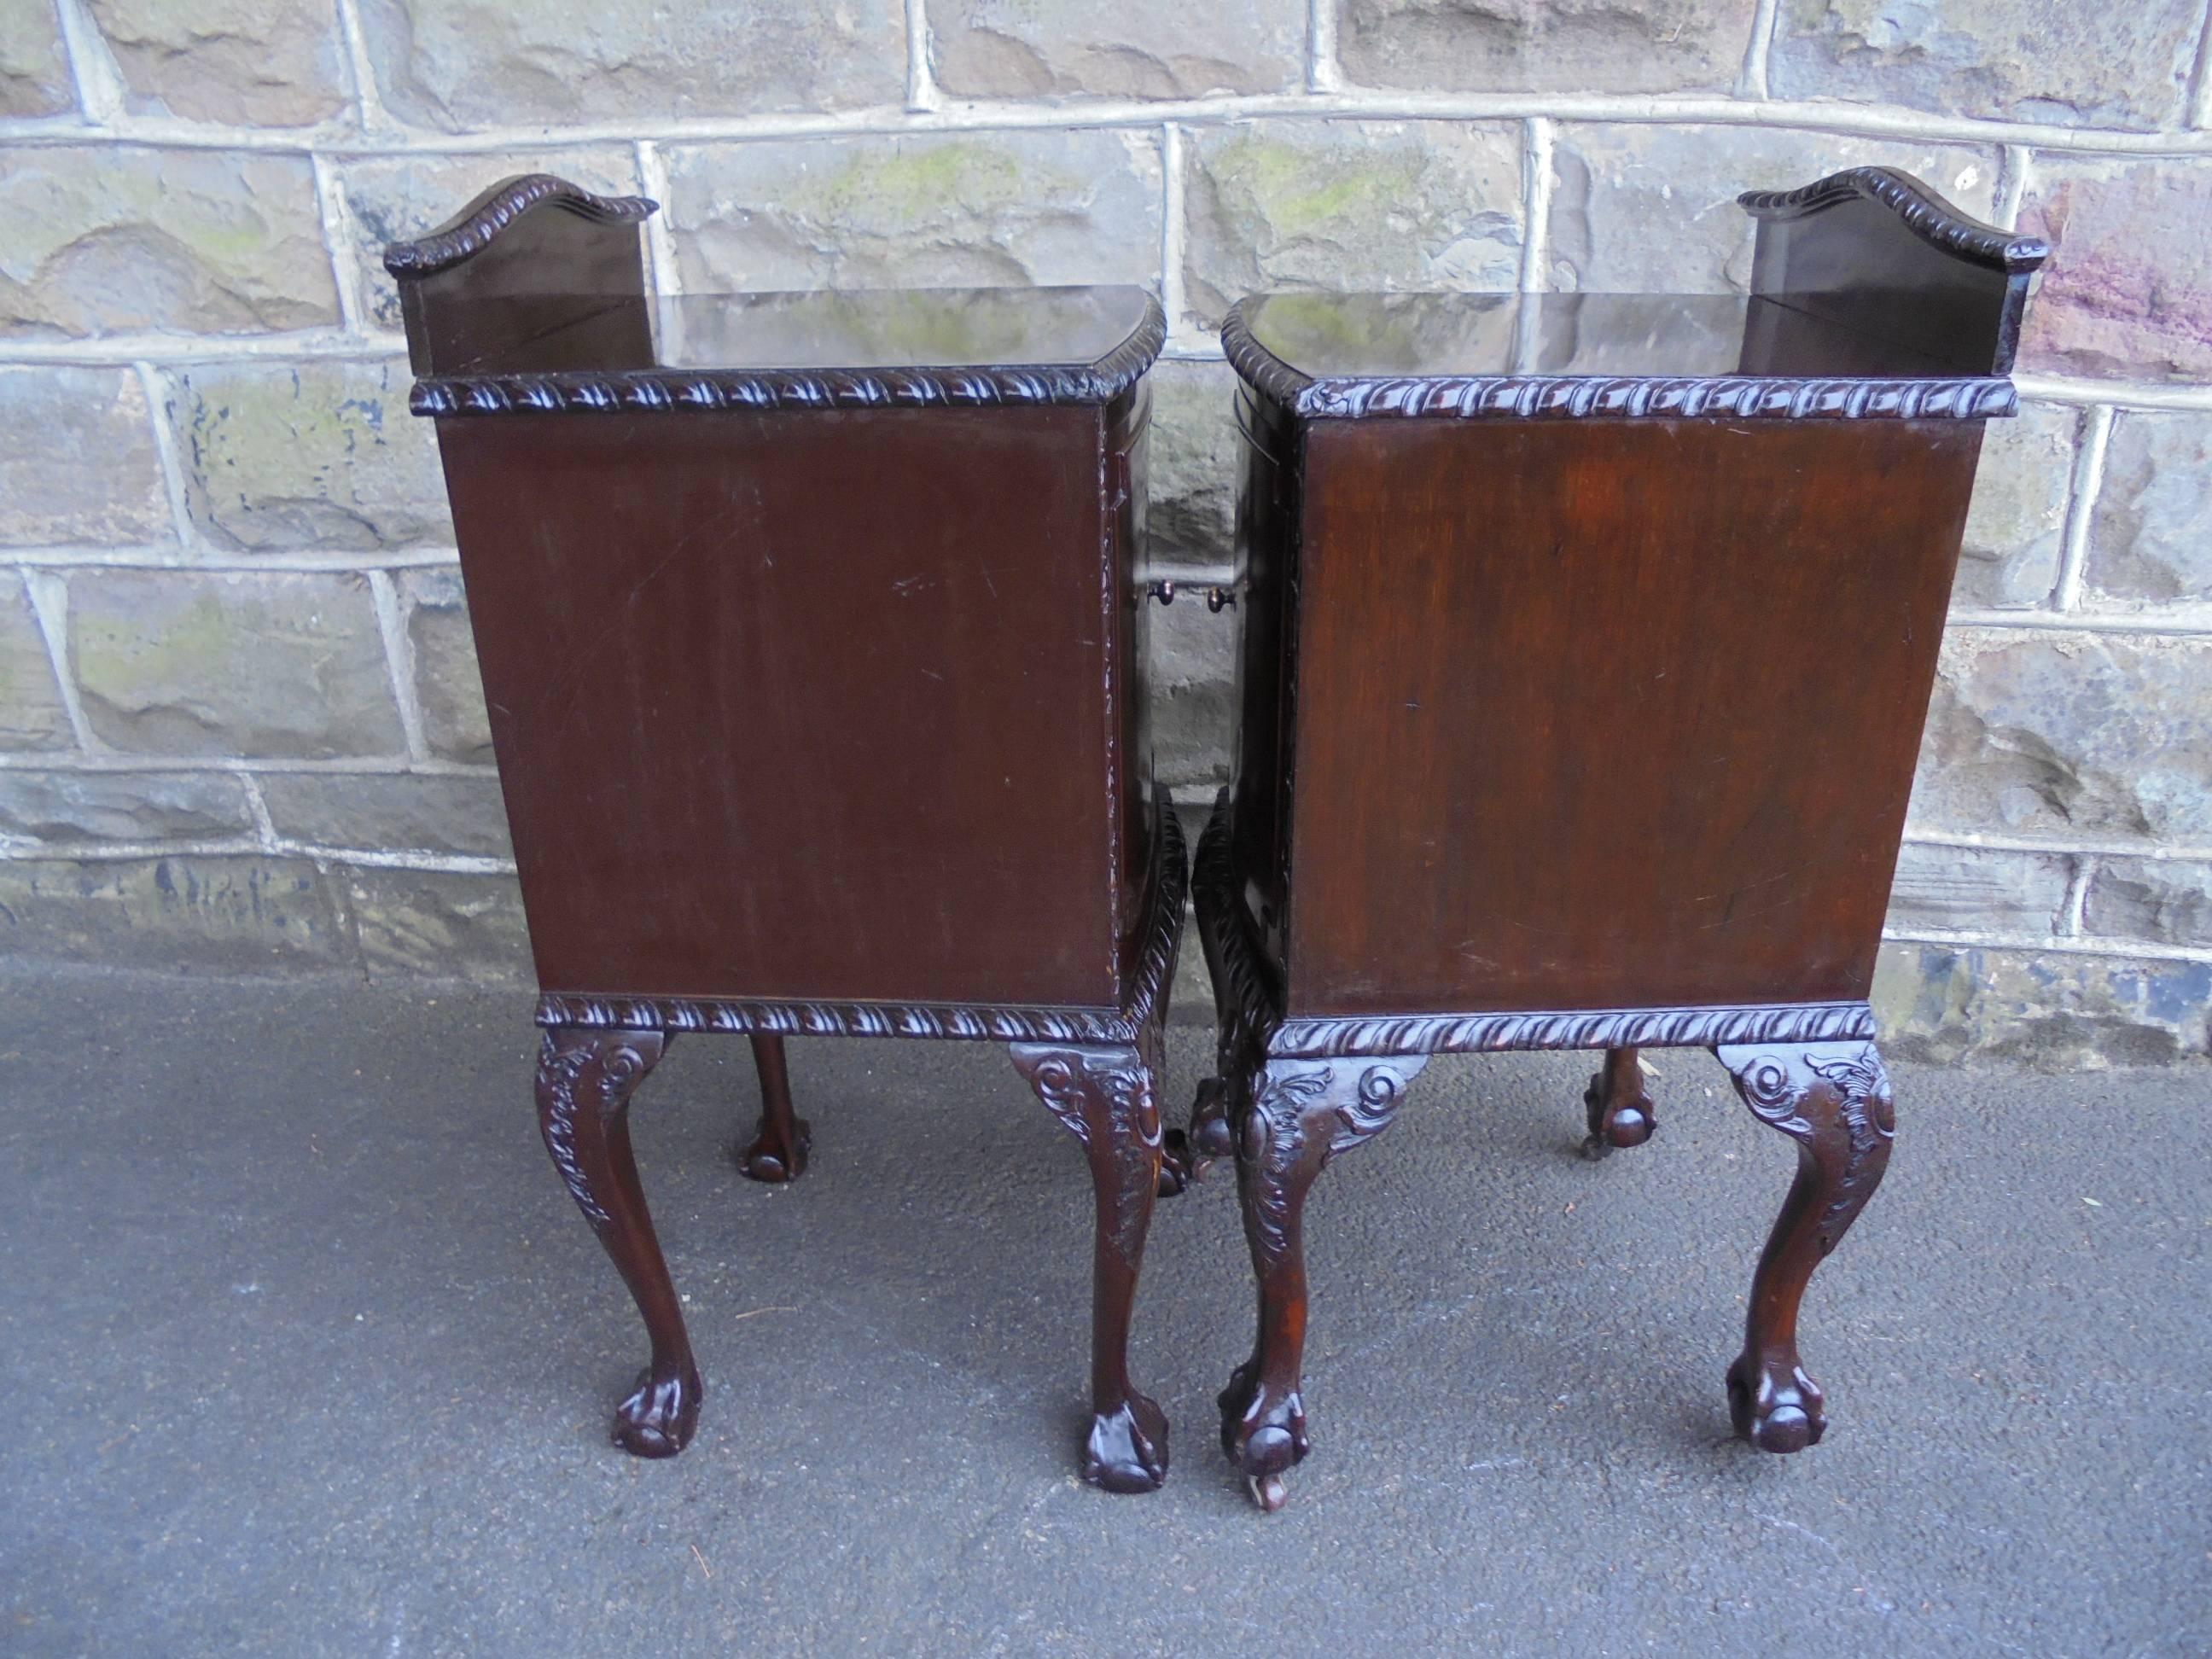 Offered for sale is this good pair of antique mahogany bedside cabinets

Dating from 1900. Made from solid mahogany. Raised gallery back, caved decoration around the top edge. Cupboard door with brass knob handle. Polished mahogany sides. Standing